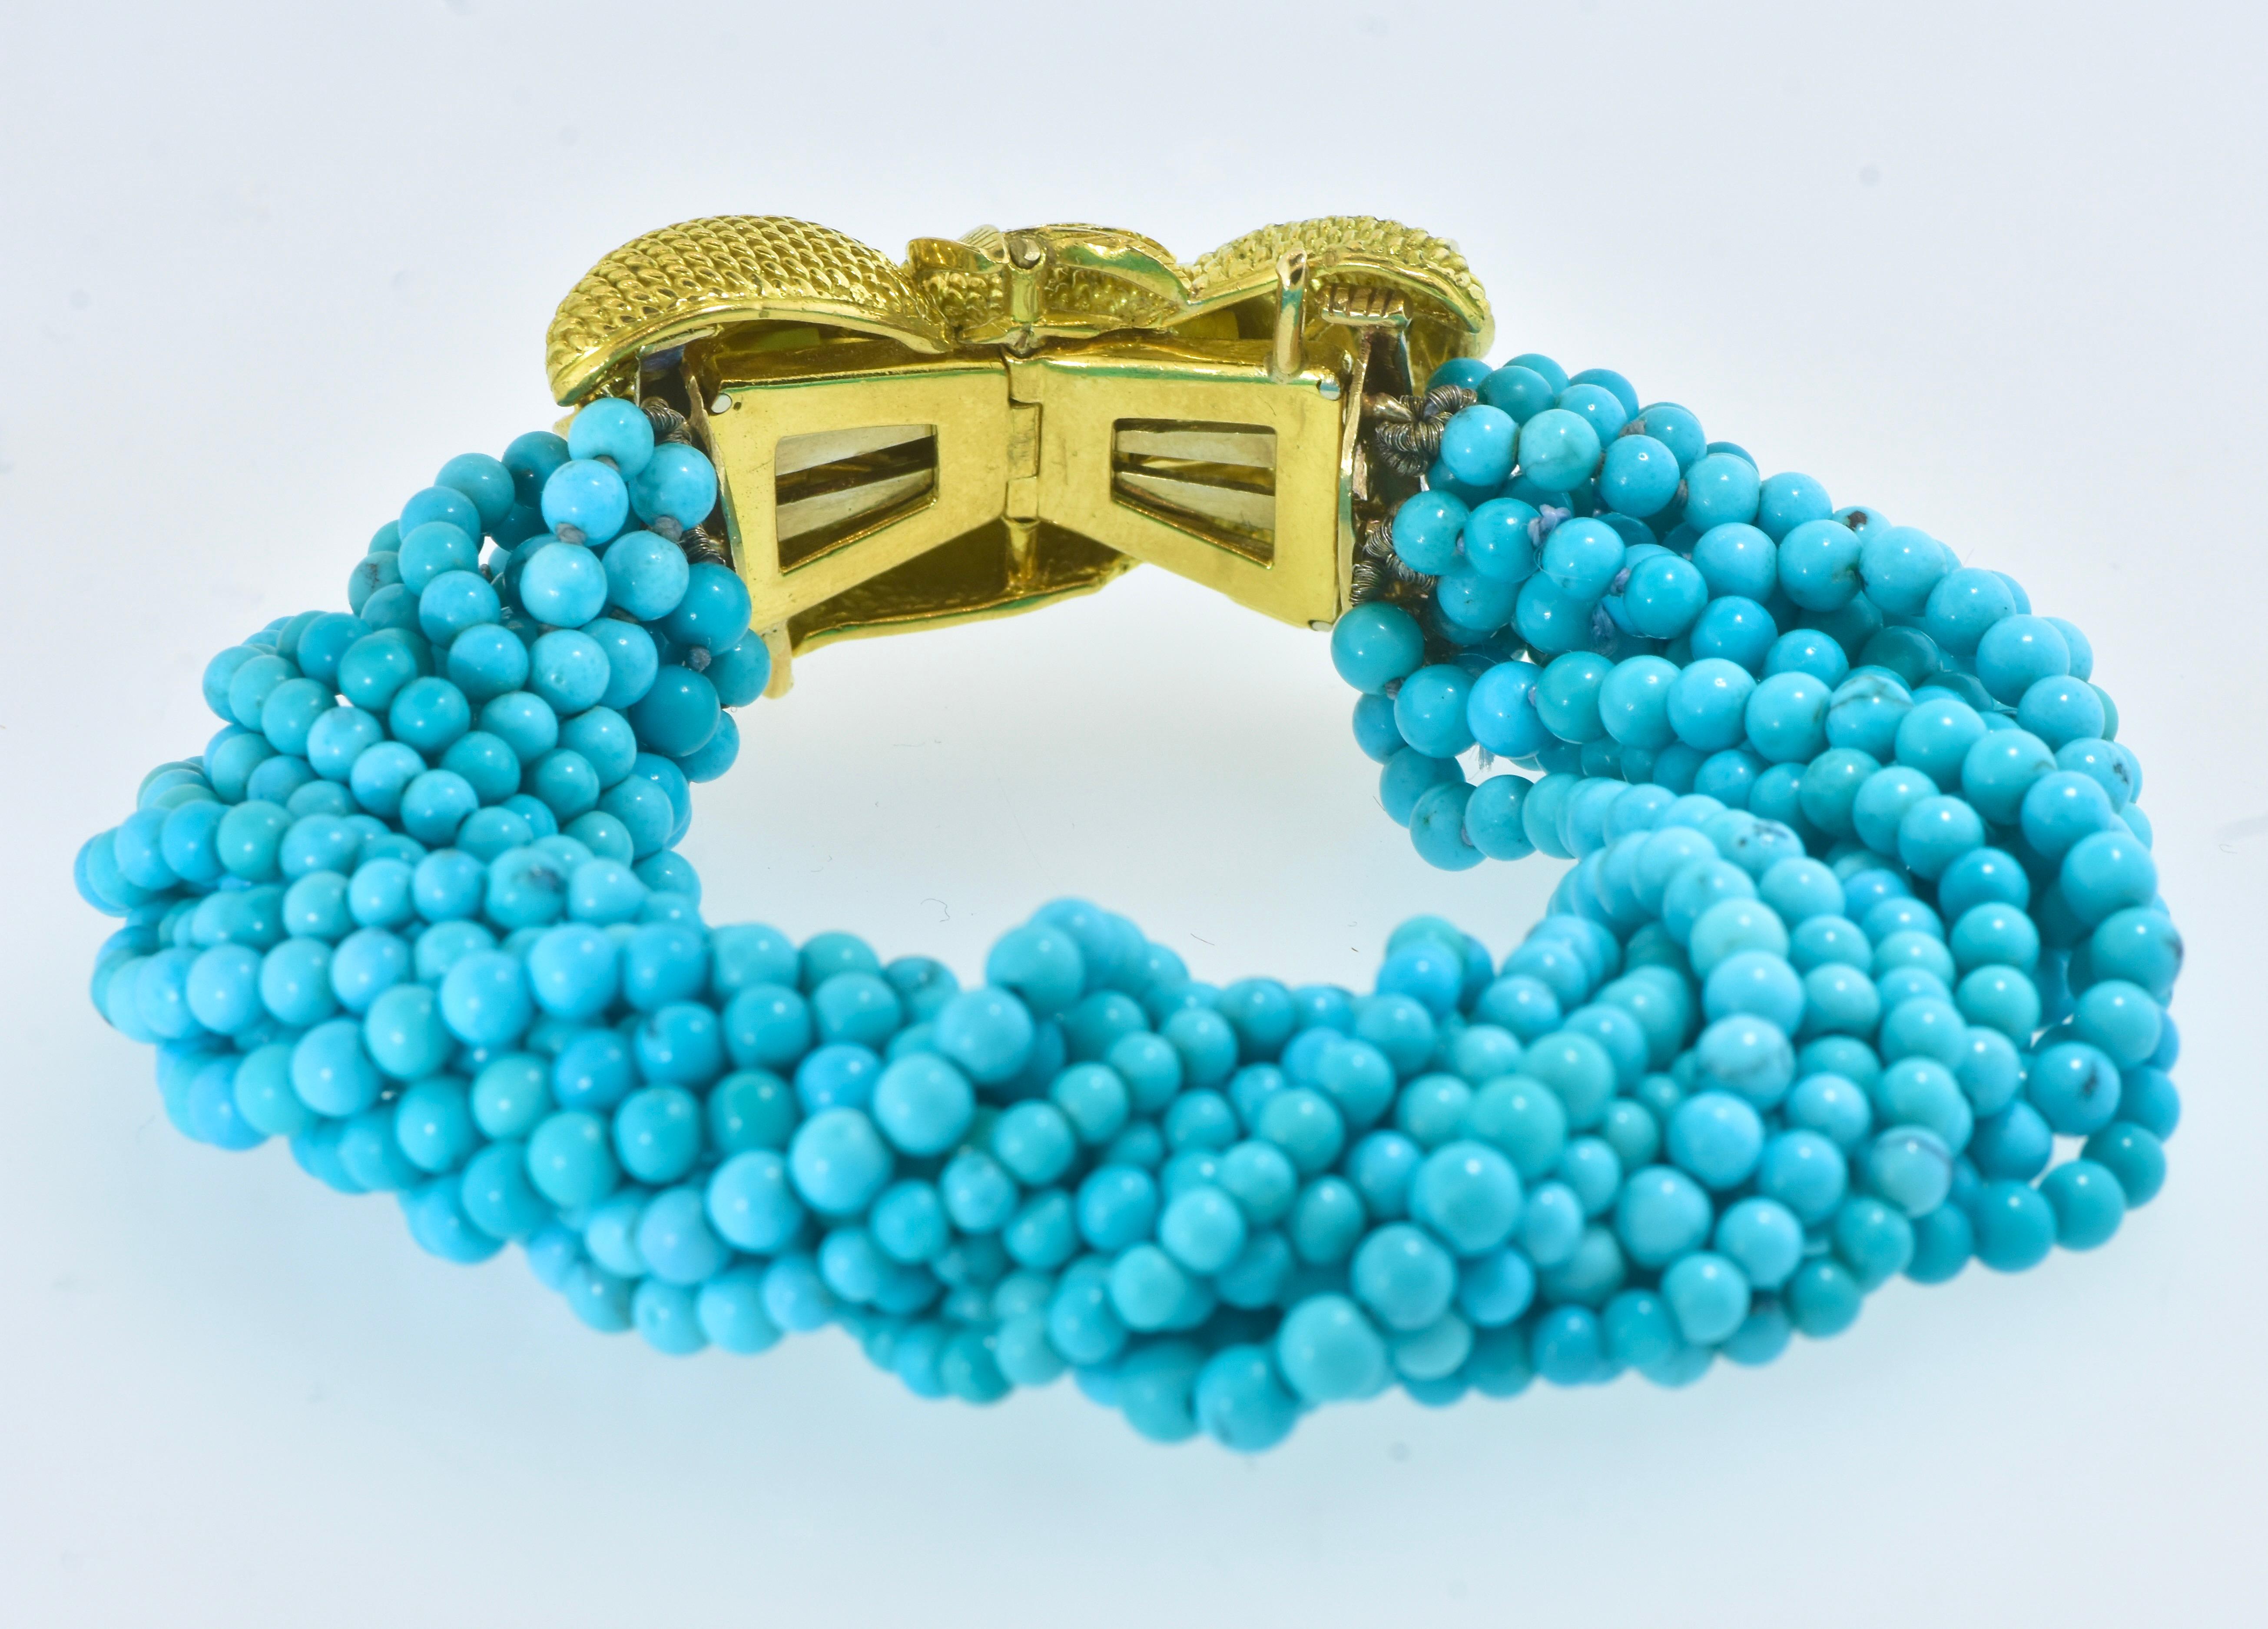 Fine Turquoise Bead Torsade Bracelet Centering an 18K High Relief Clasp, c. 1965 For Sale 5